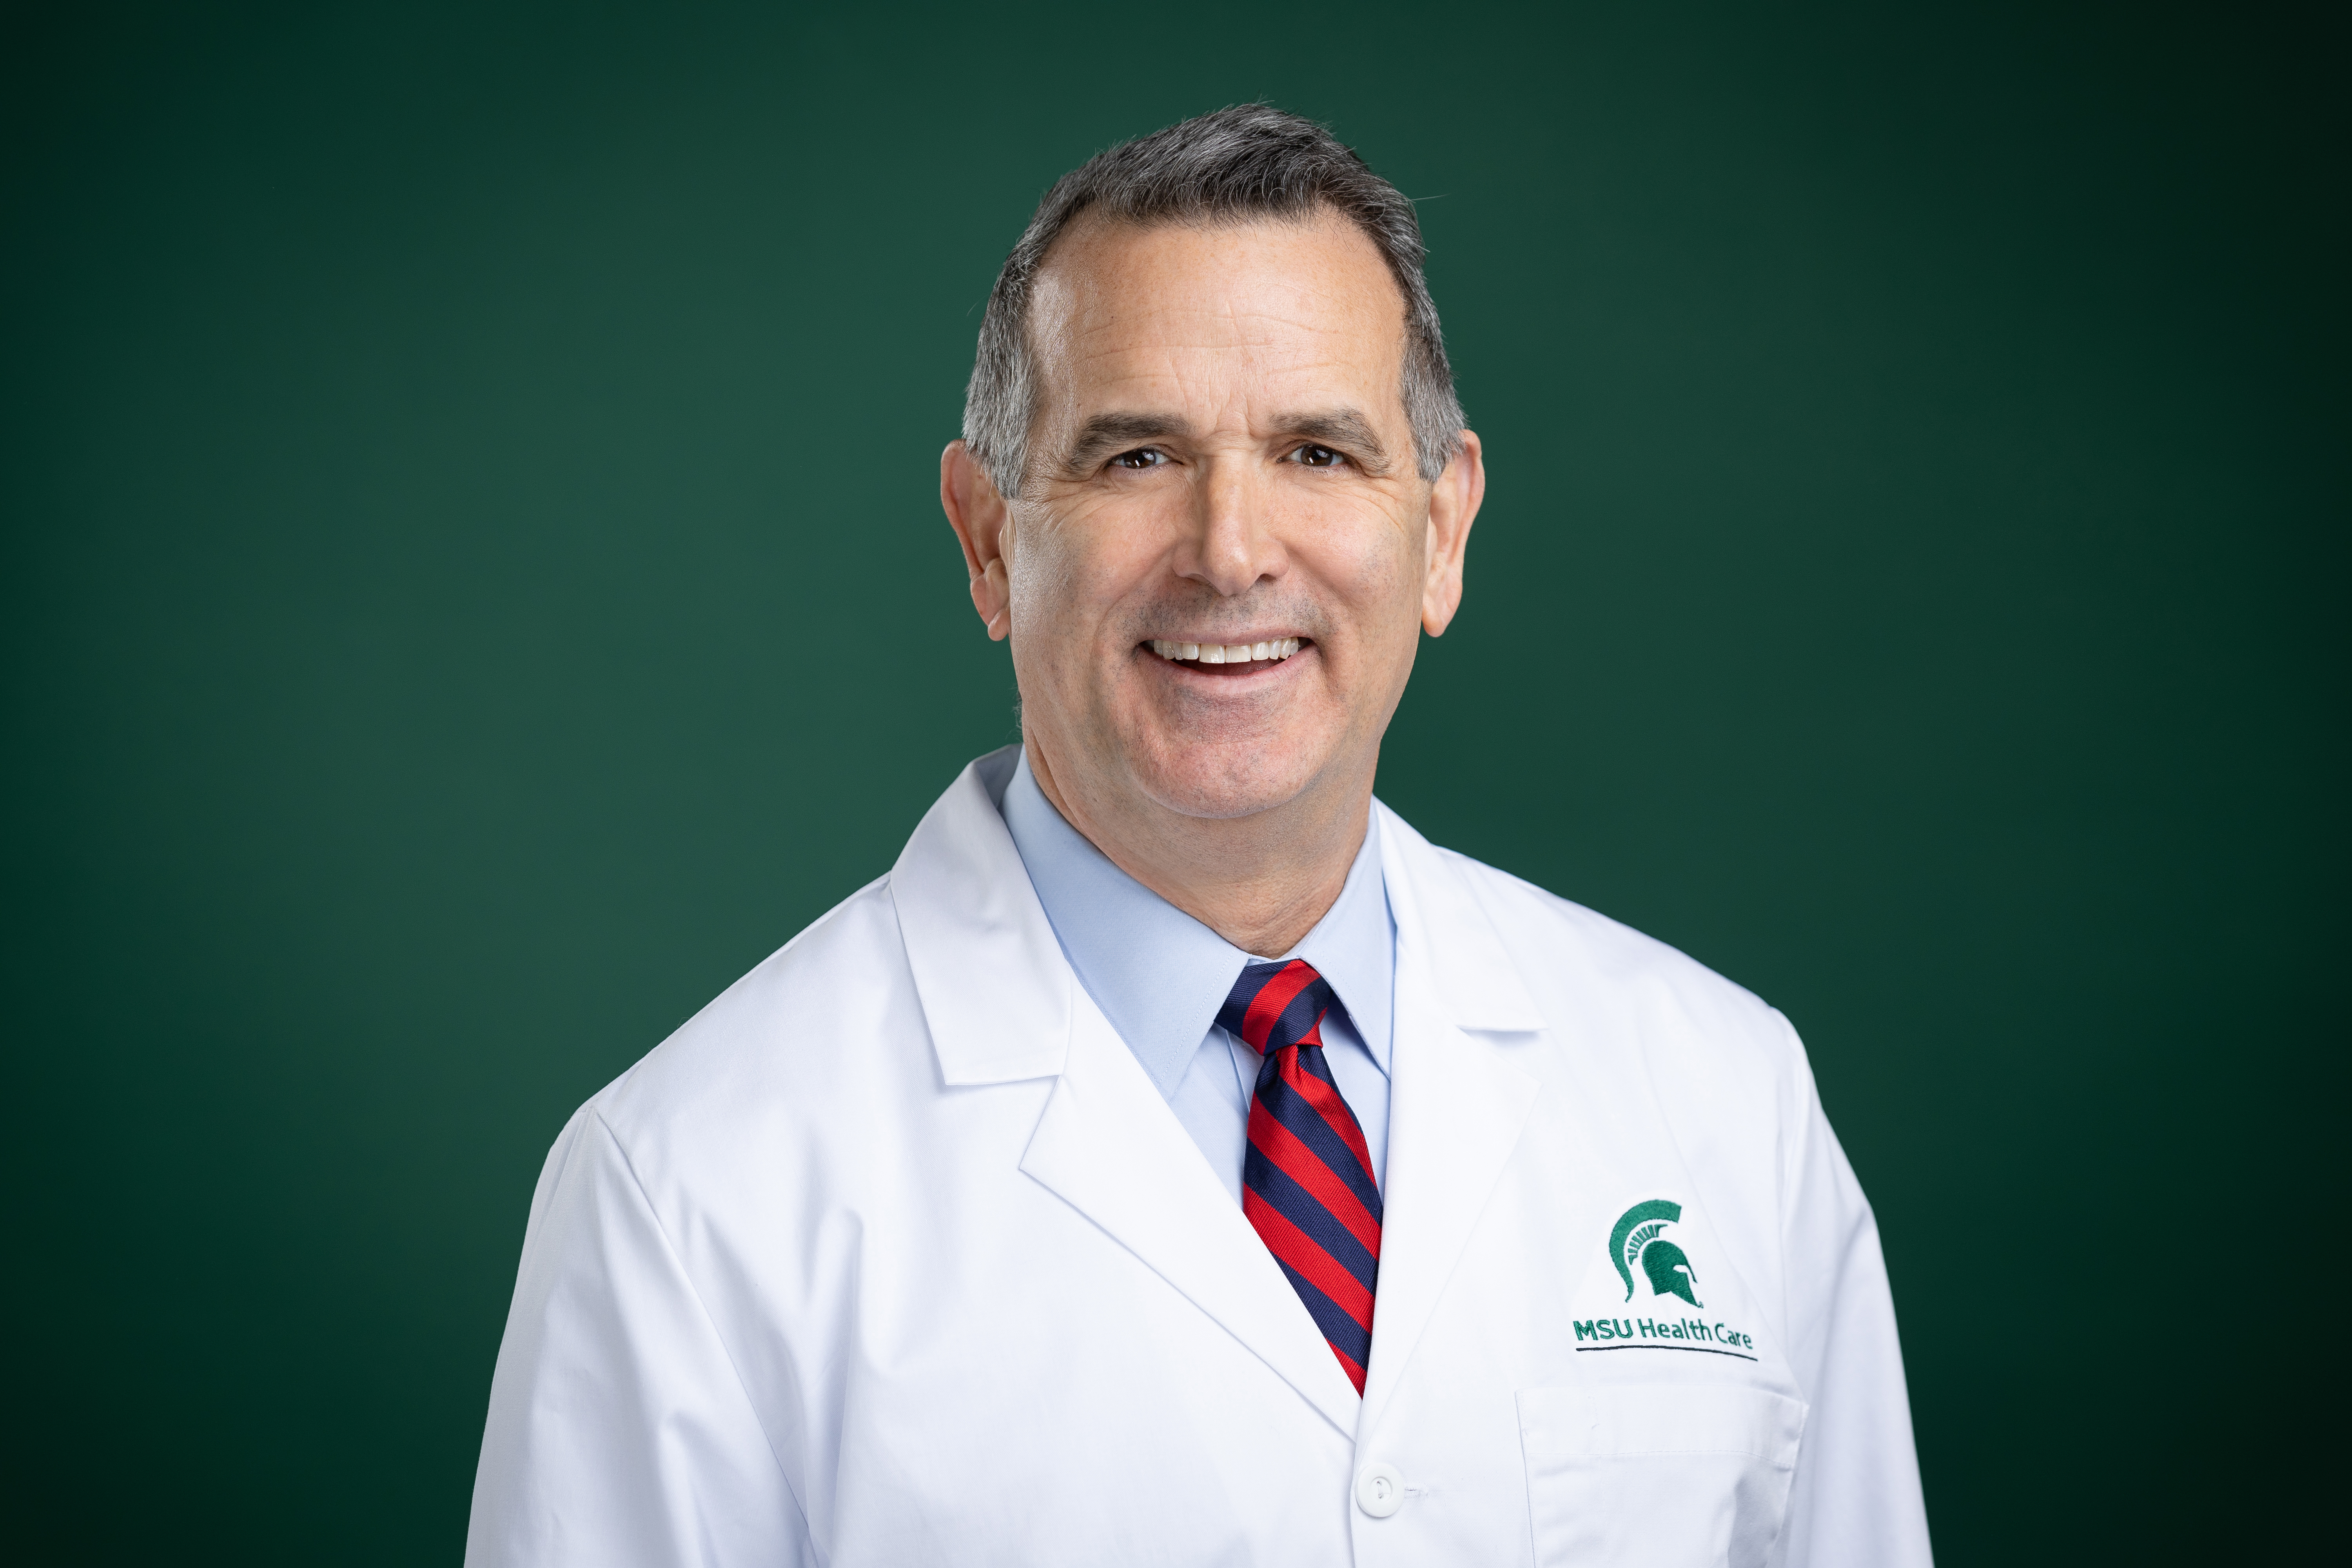 MSU Health Care names new Chief Medical Officer